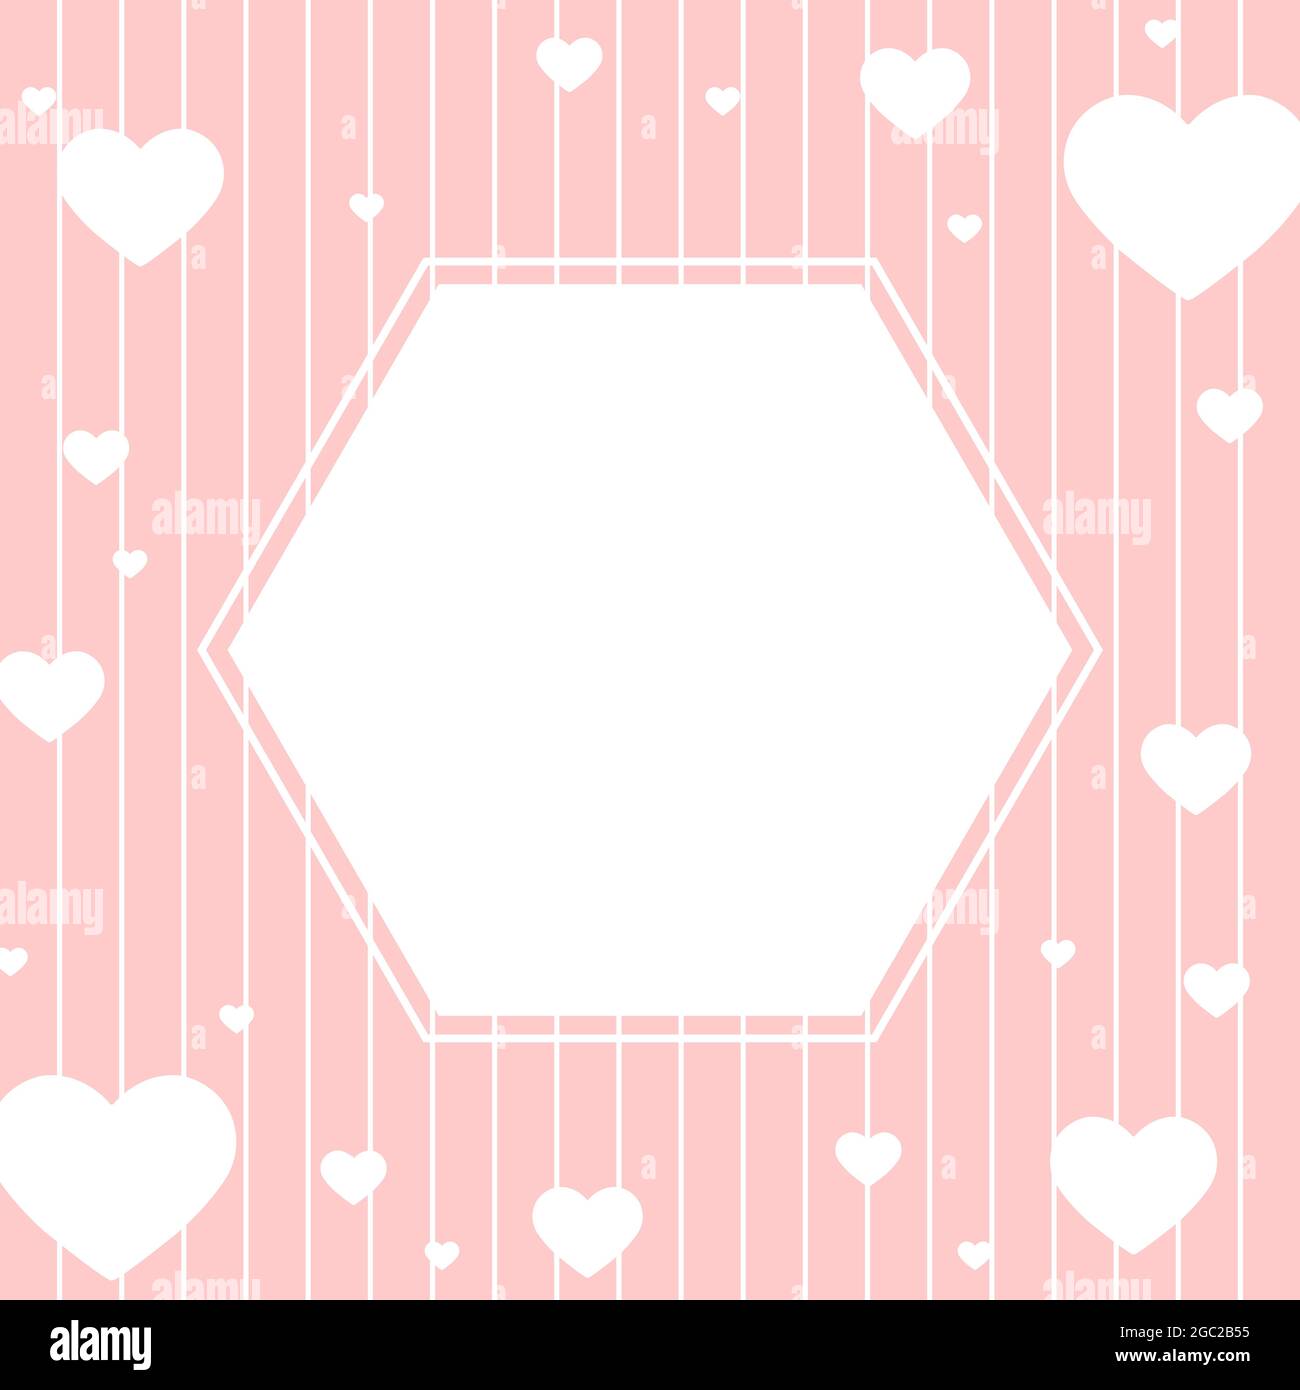 Background with a hexagon in the center for text, photography or illustration, and many different sized hearts for greetings, cards, banners and creat Stock Vector